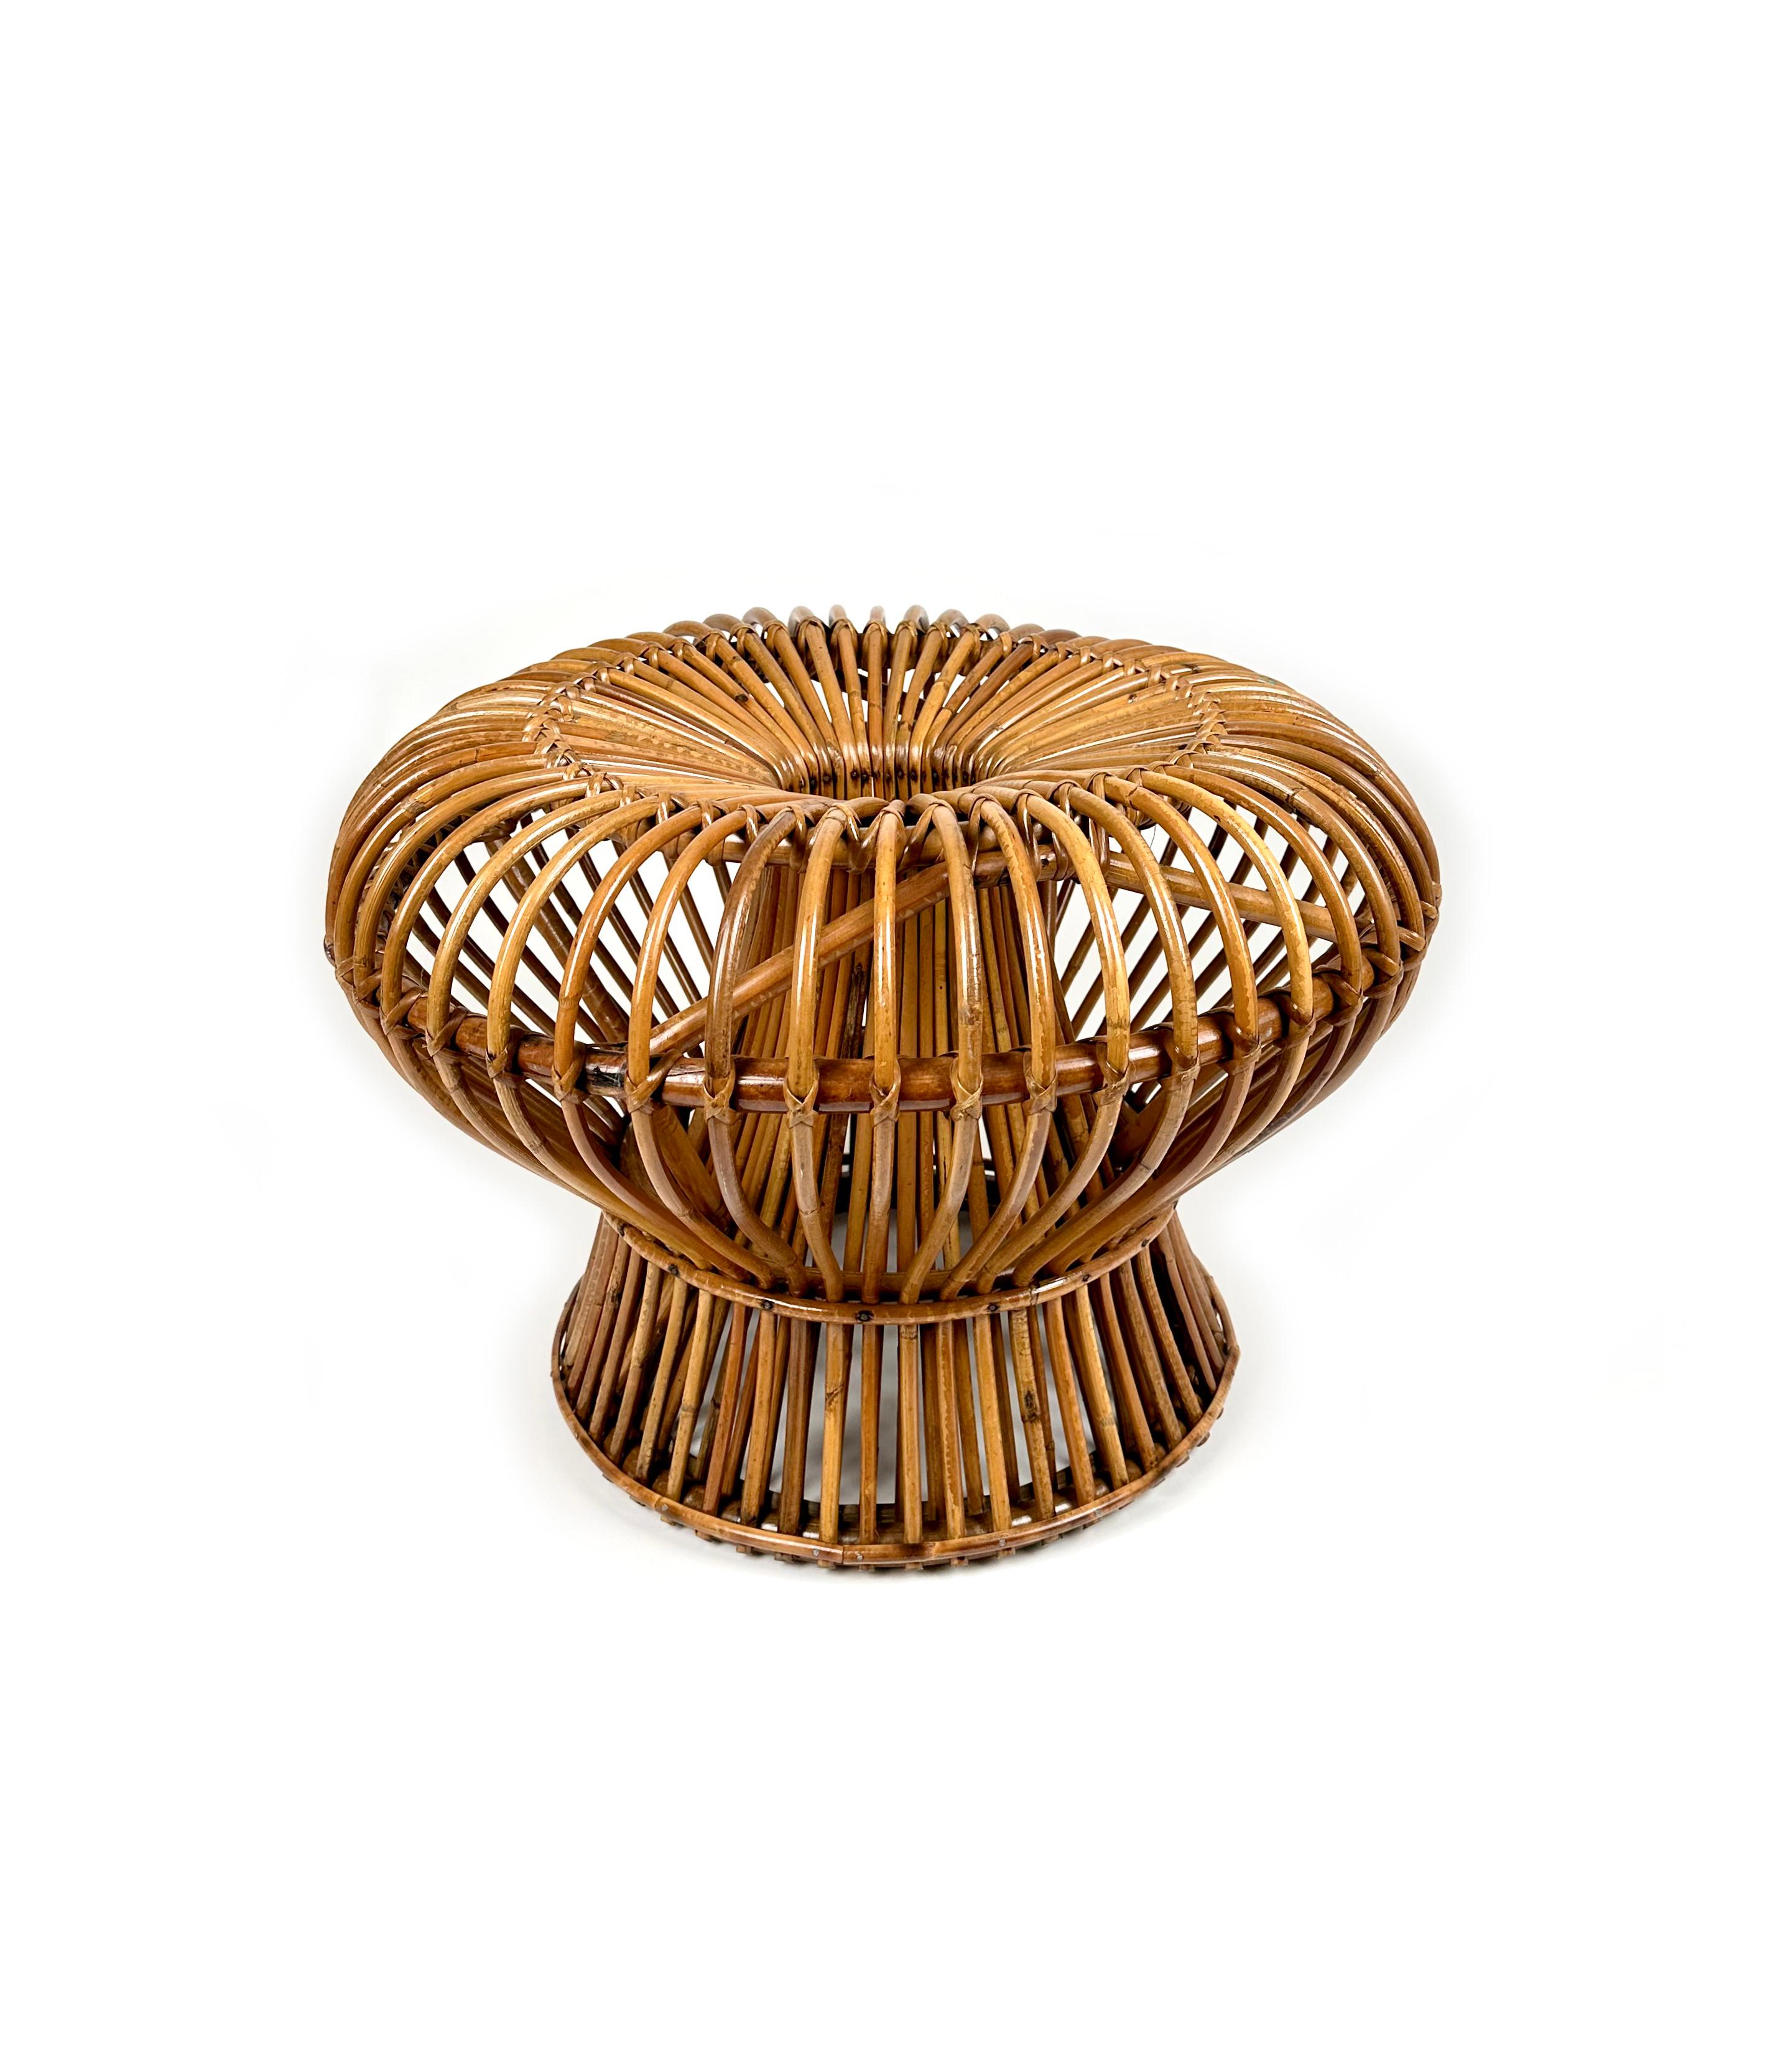 Midcentury Ottoman Stool in Bamboo and Rattan Franco Albini Style, Italy, 1960s In Good Condition For Sale In Rome, IT